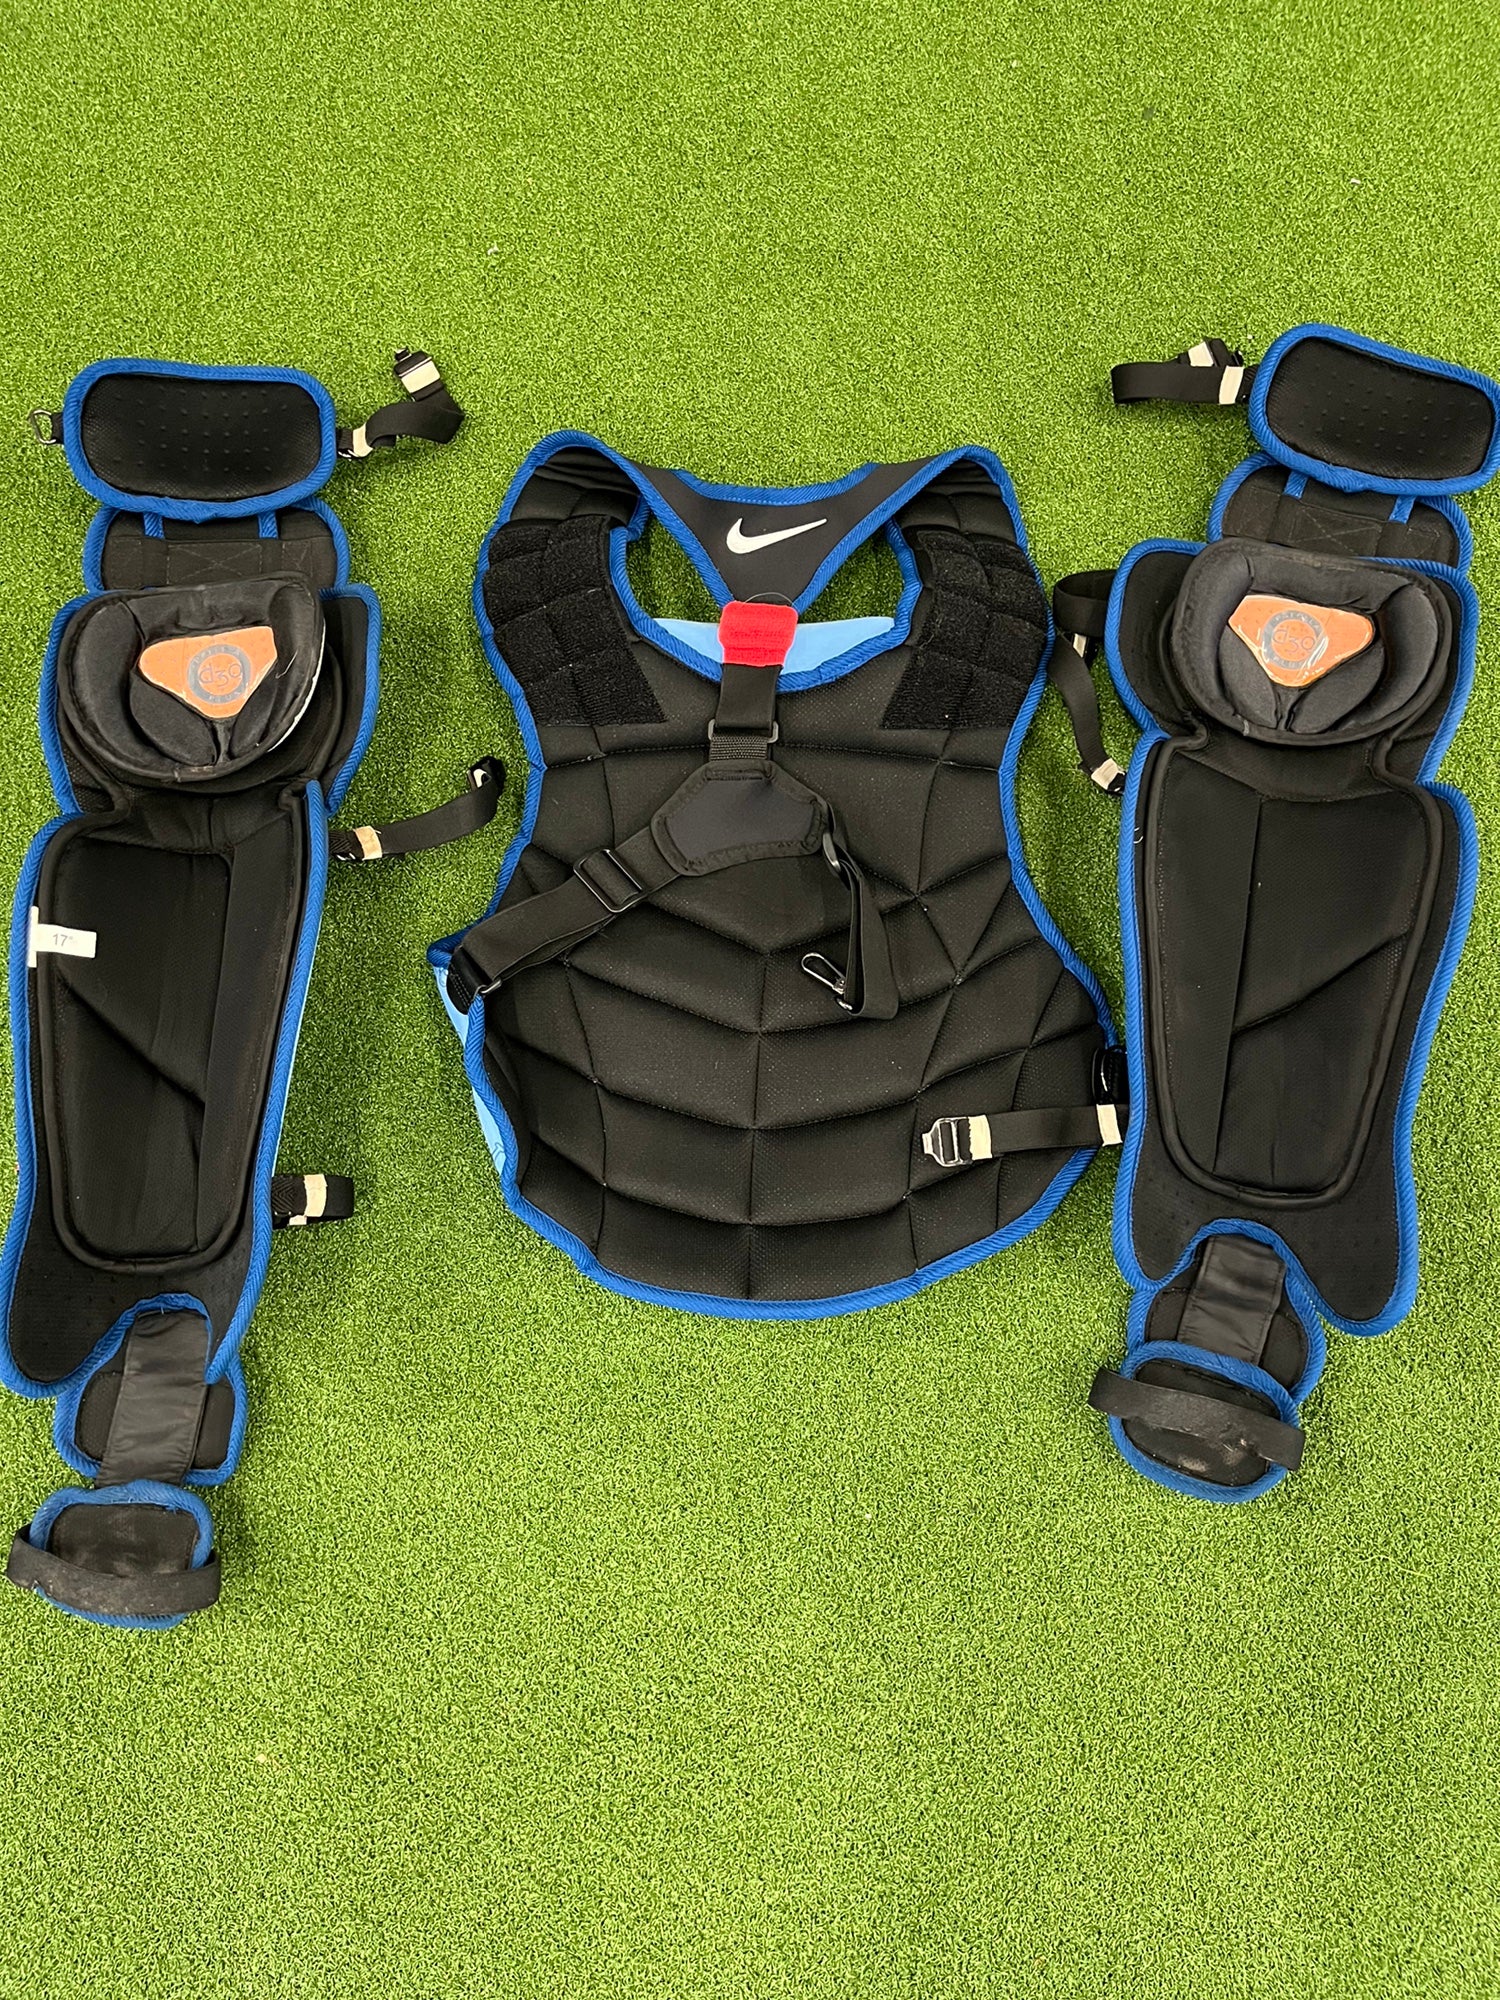 A detailed view of the Nike catchers gear honoring Father's Day worn  News Photo - Getty Images